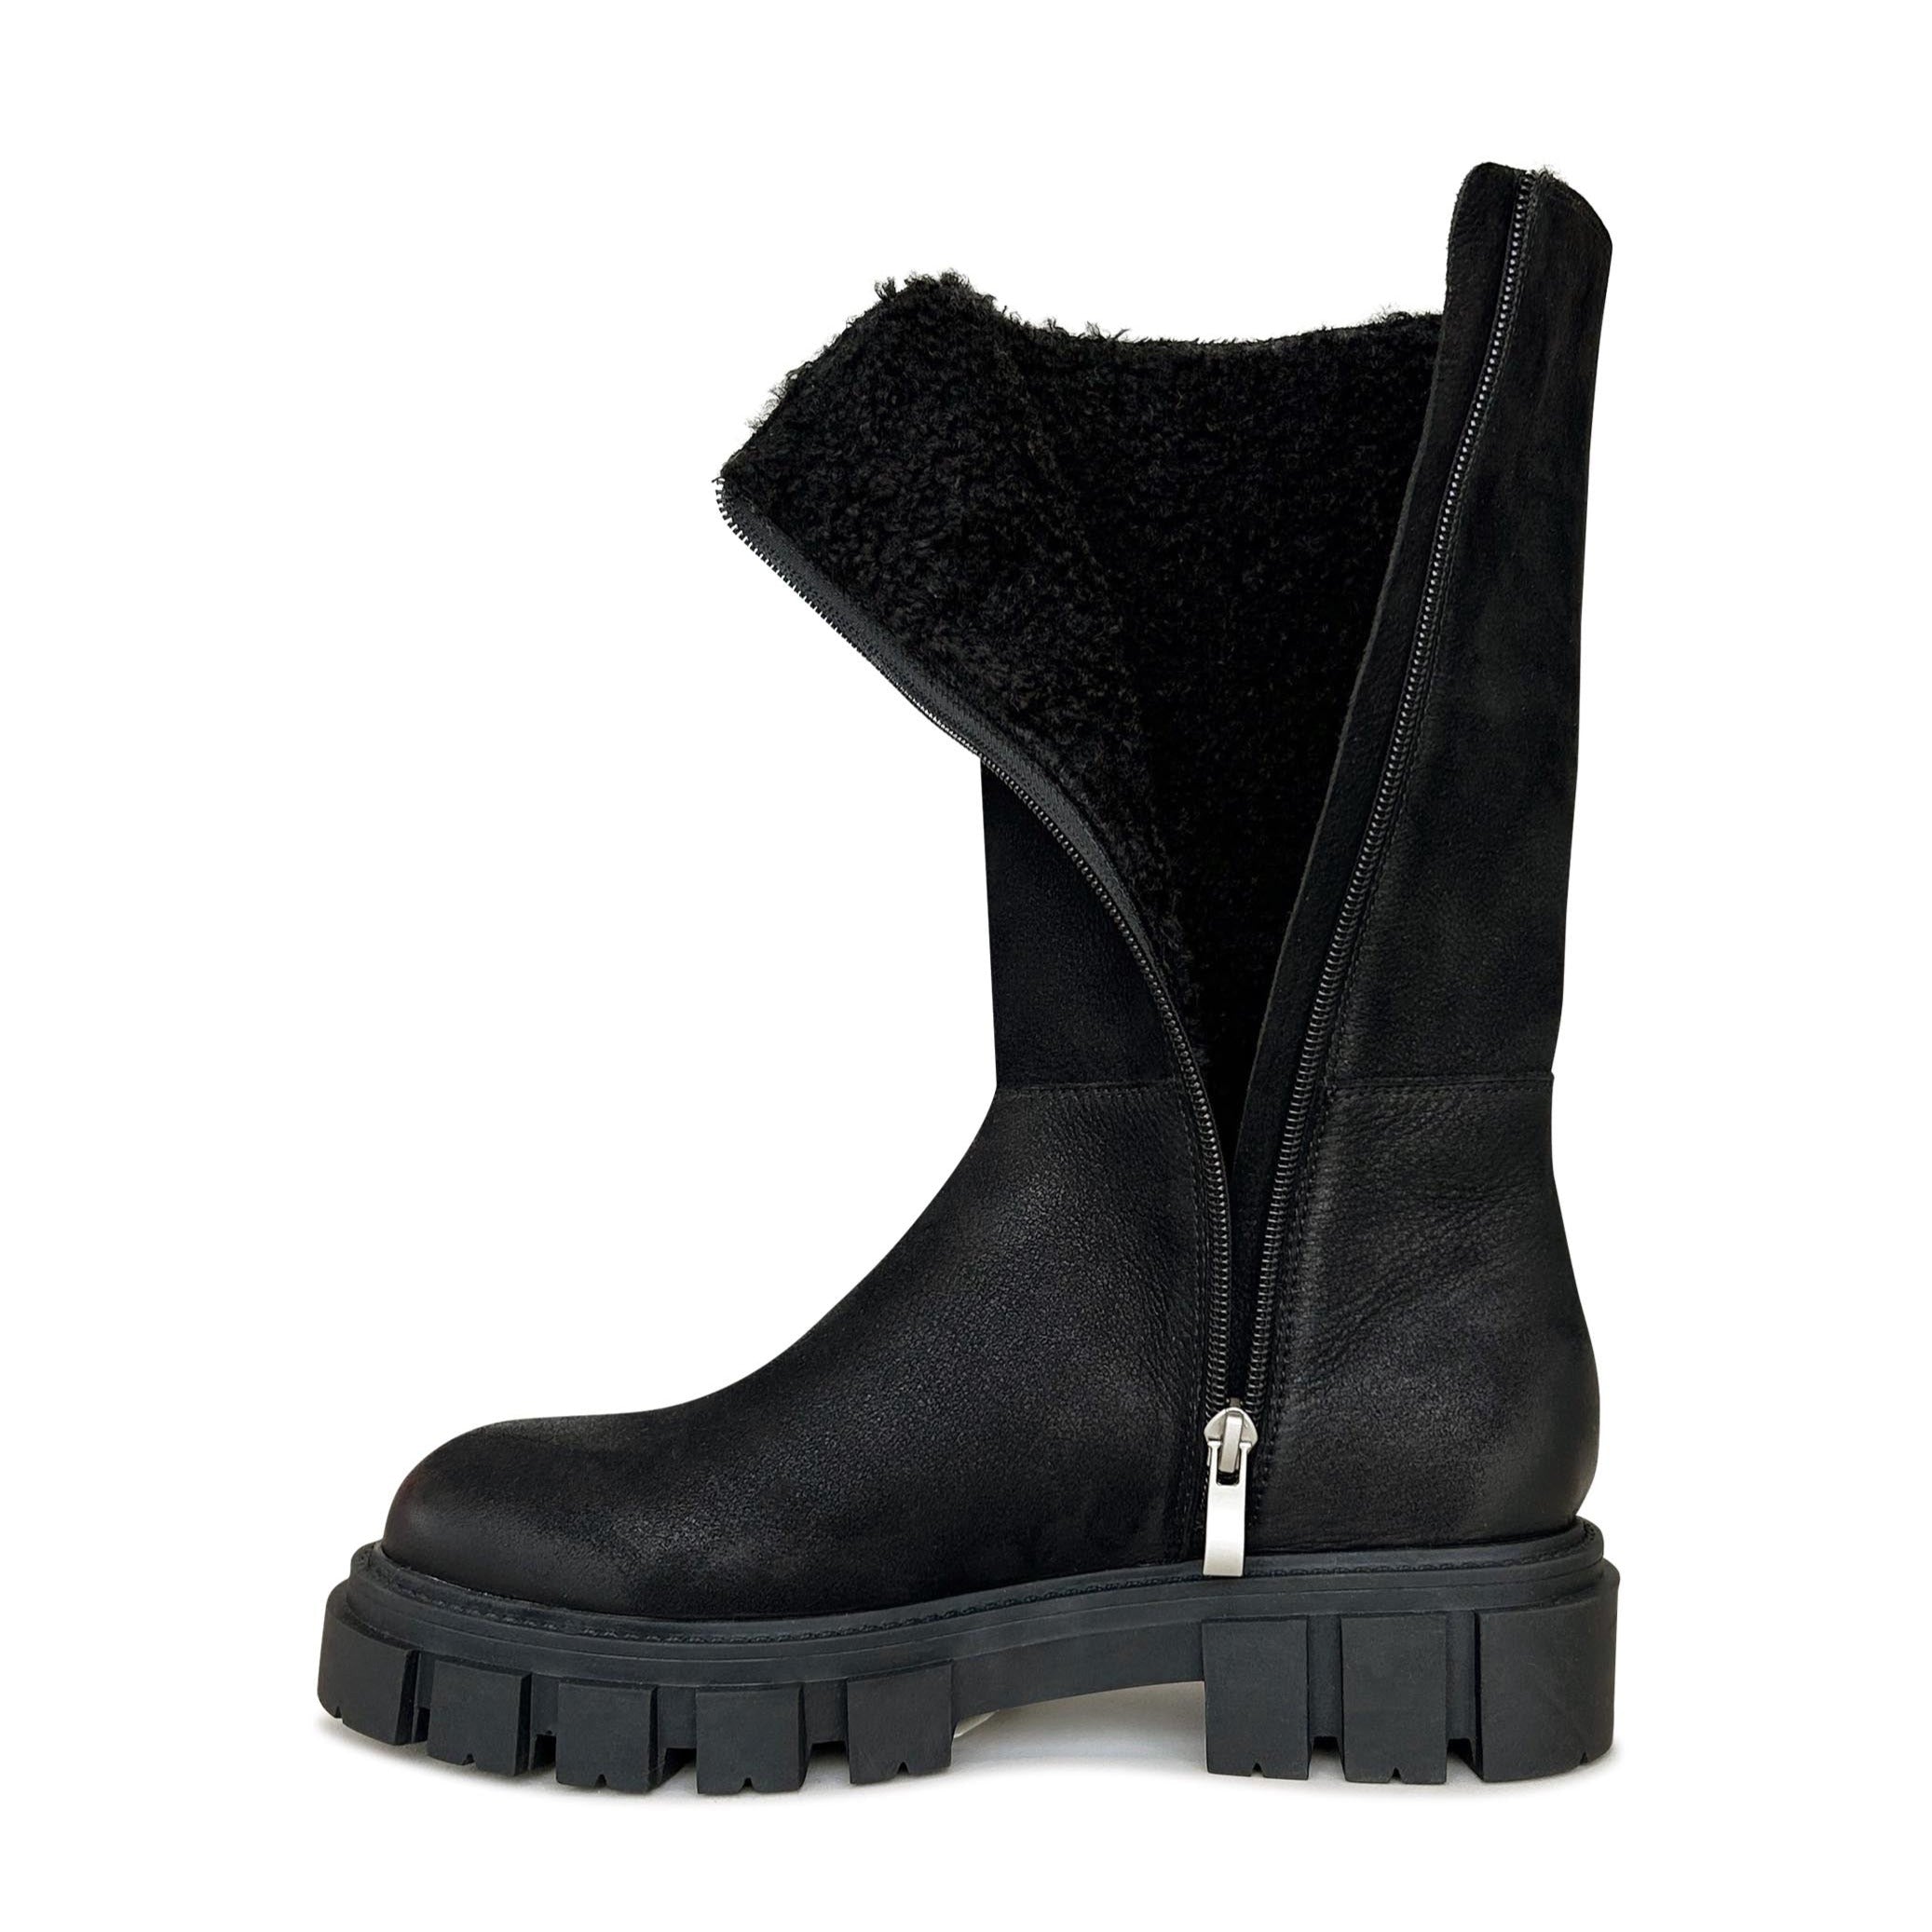 SHEARLING - EOS Footwear - Long Boots #color_Black